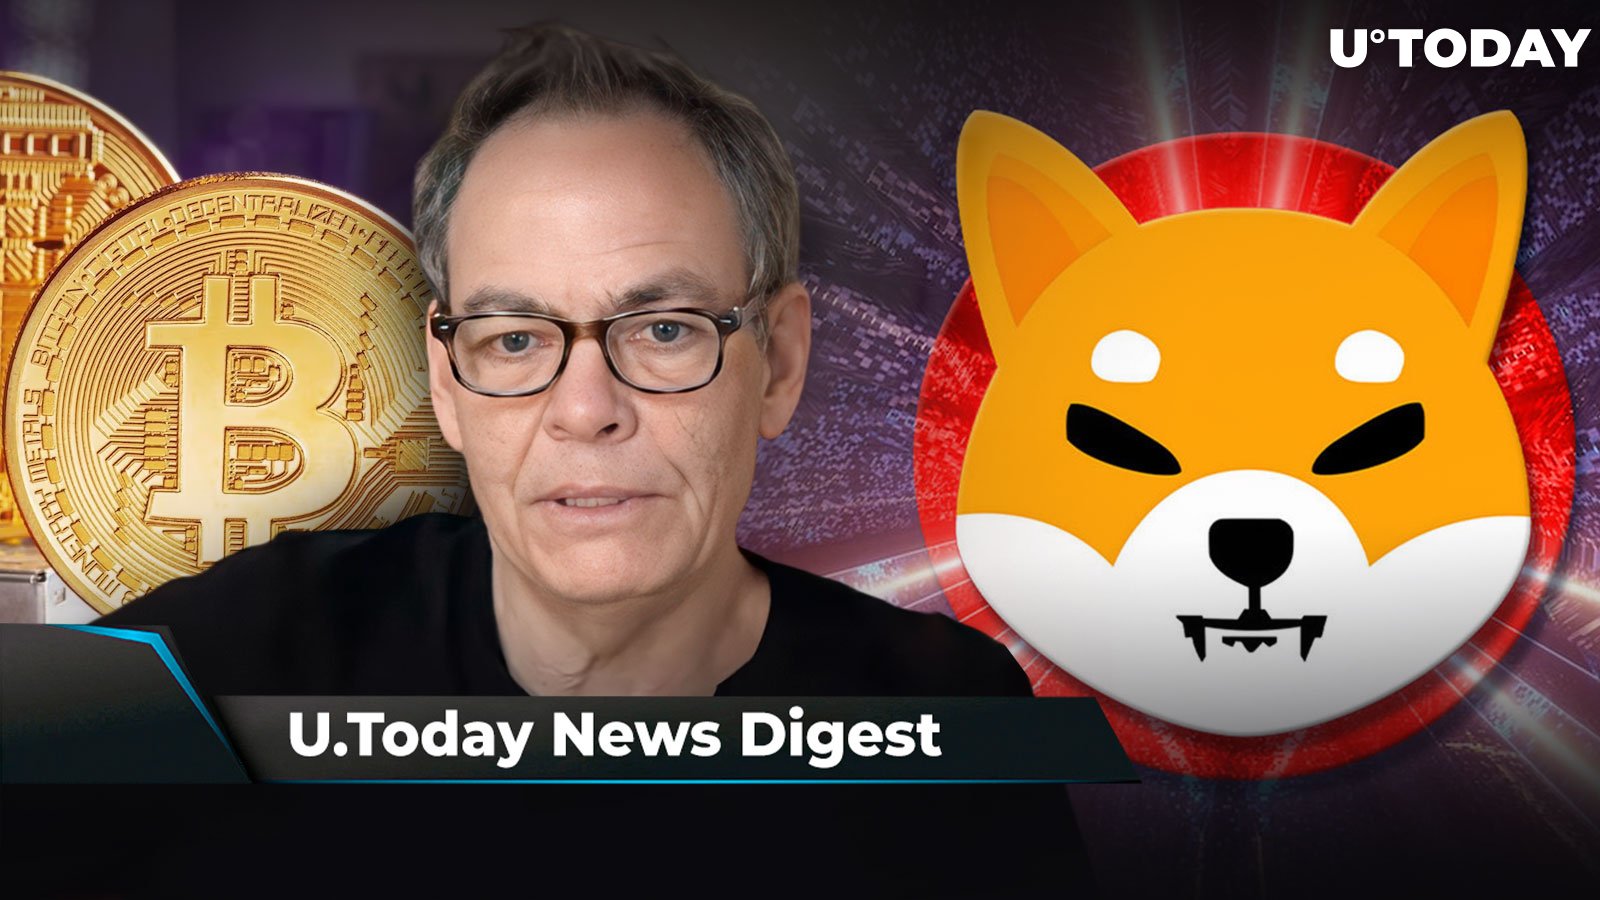 Millions of Businesses Can Now Accept SHIB, BTC to Break $30,000 Max Keiser Says: Crypto News Digest by U.Today